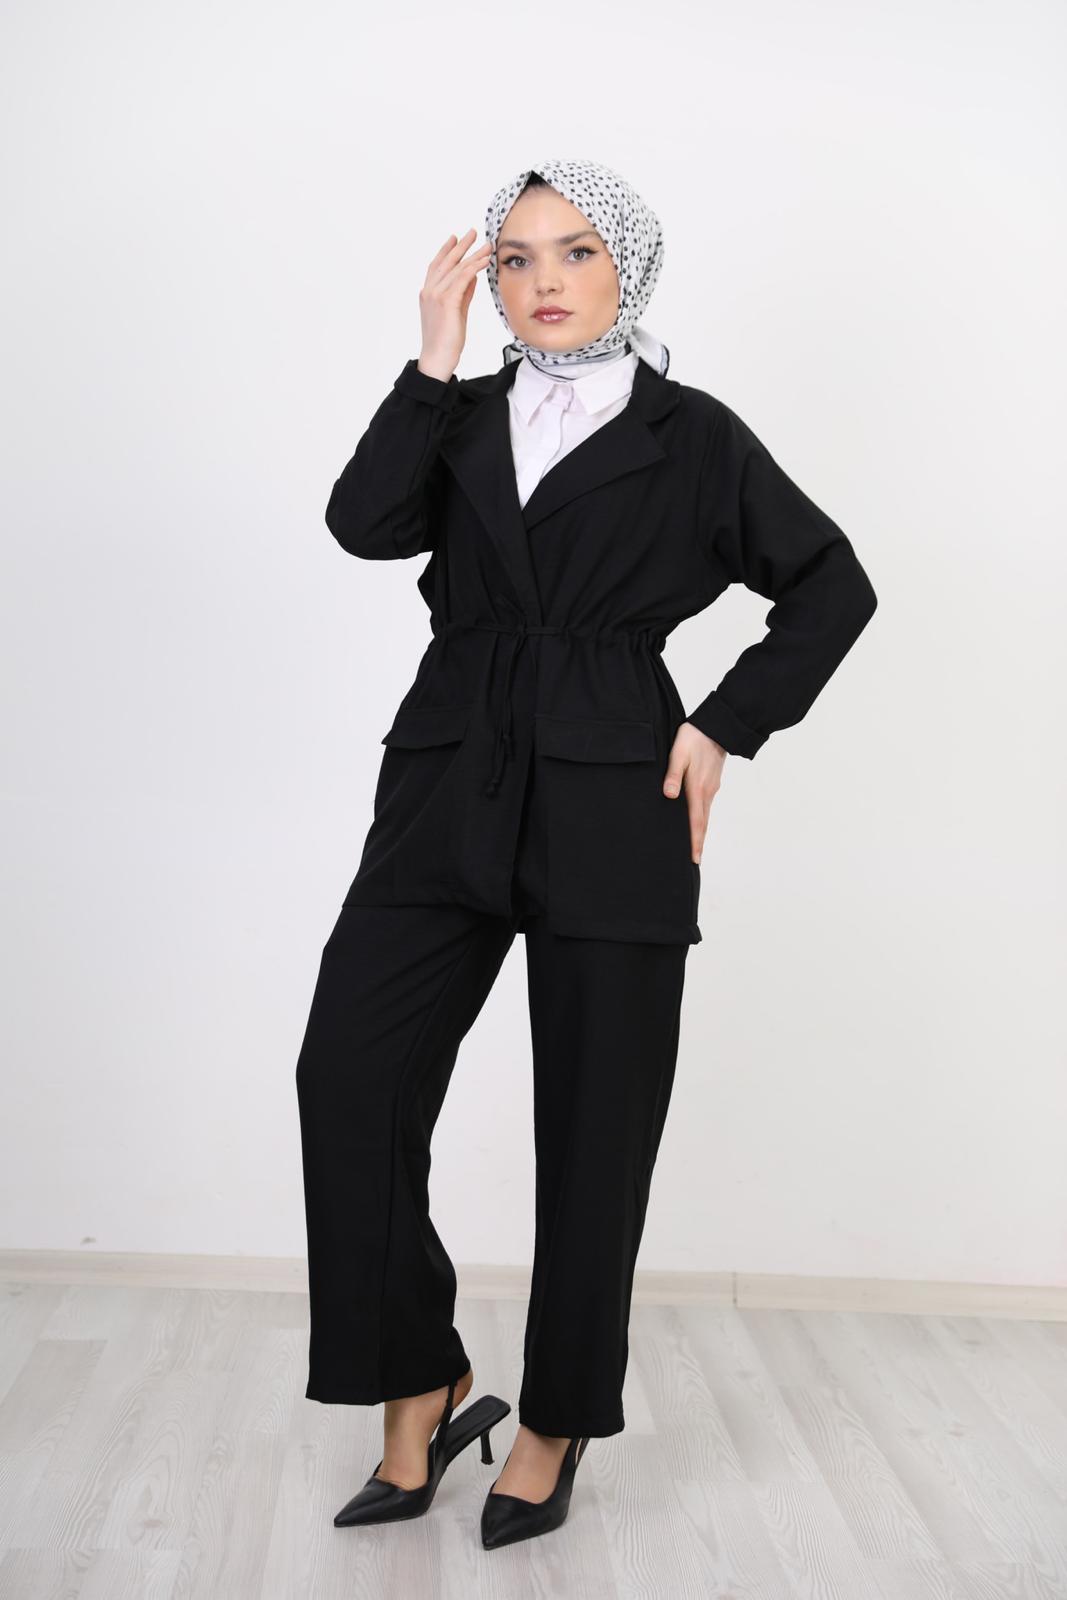 Jacketed Suit Black